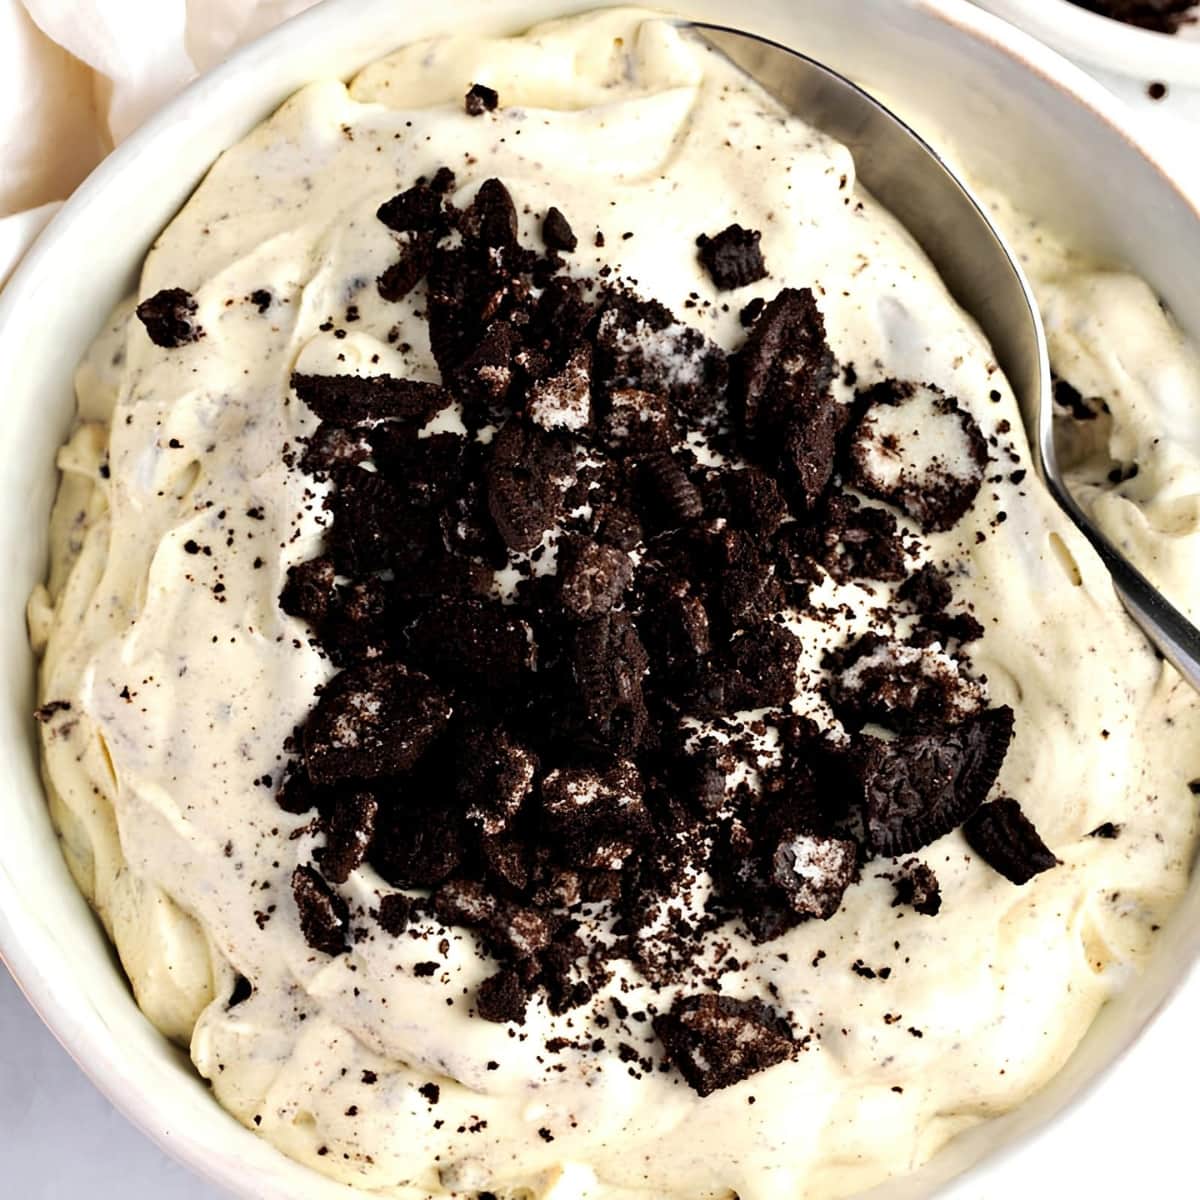 Spoon in Bowl of Oreo Fluff with Crushed Oreo Topping